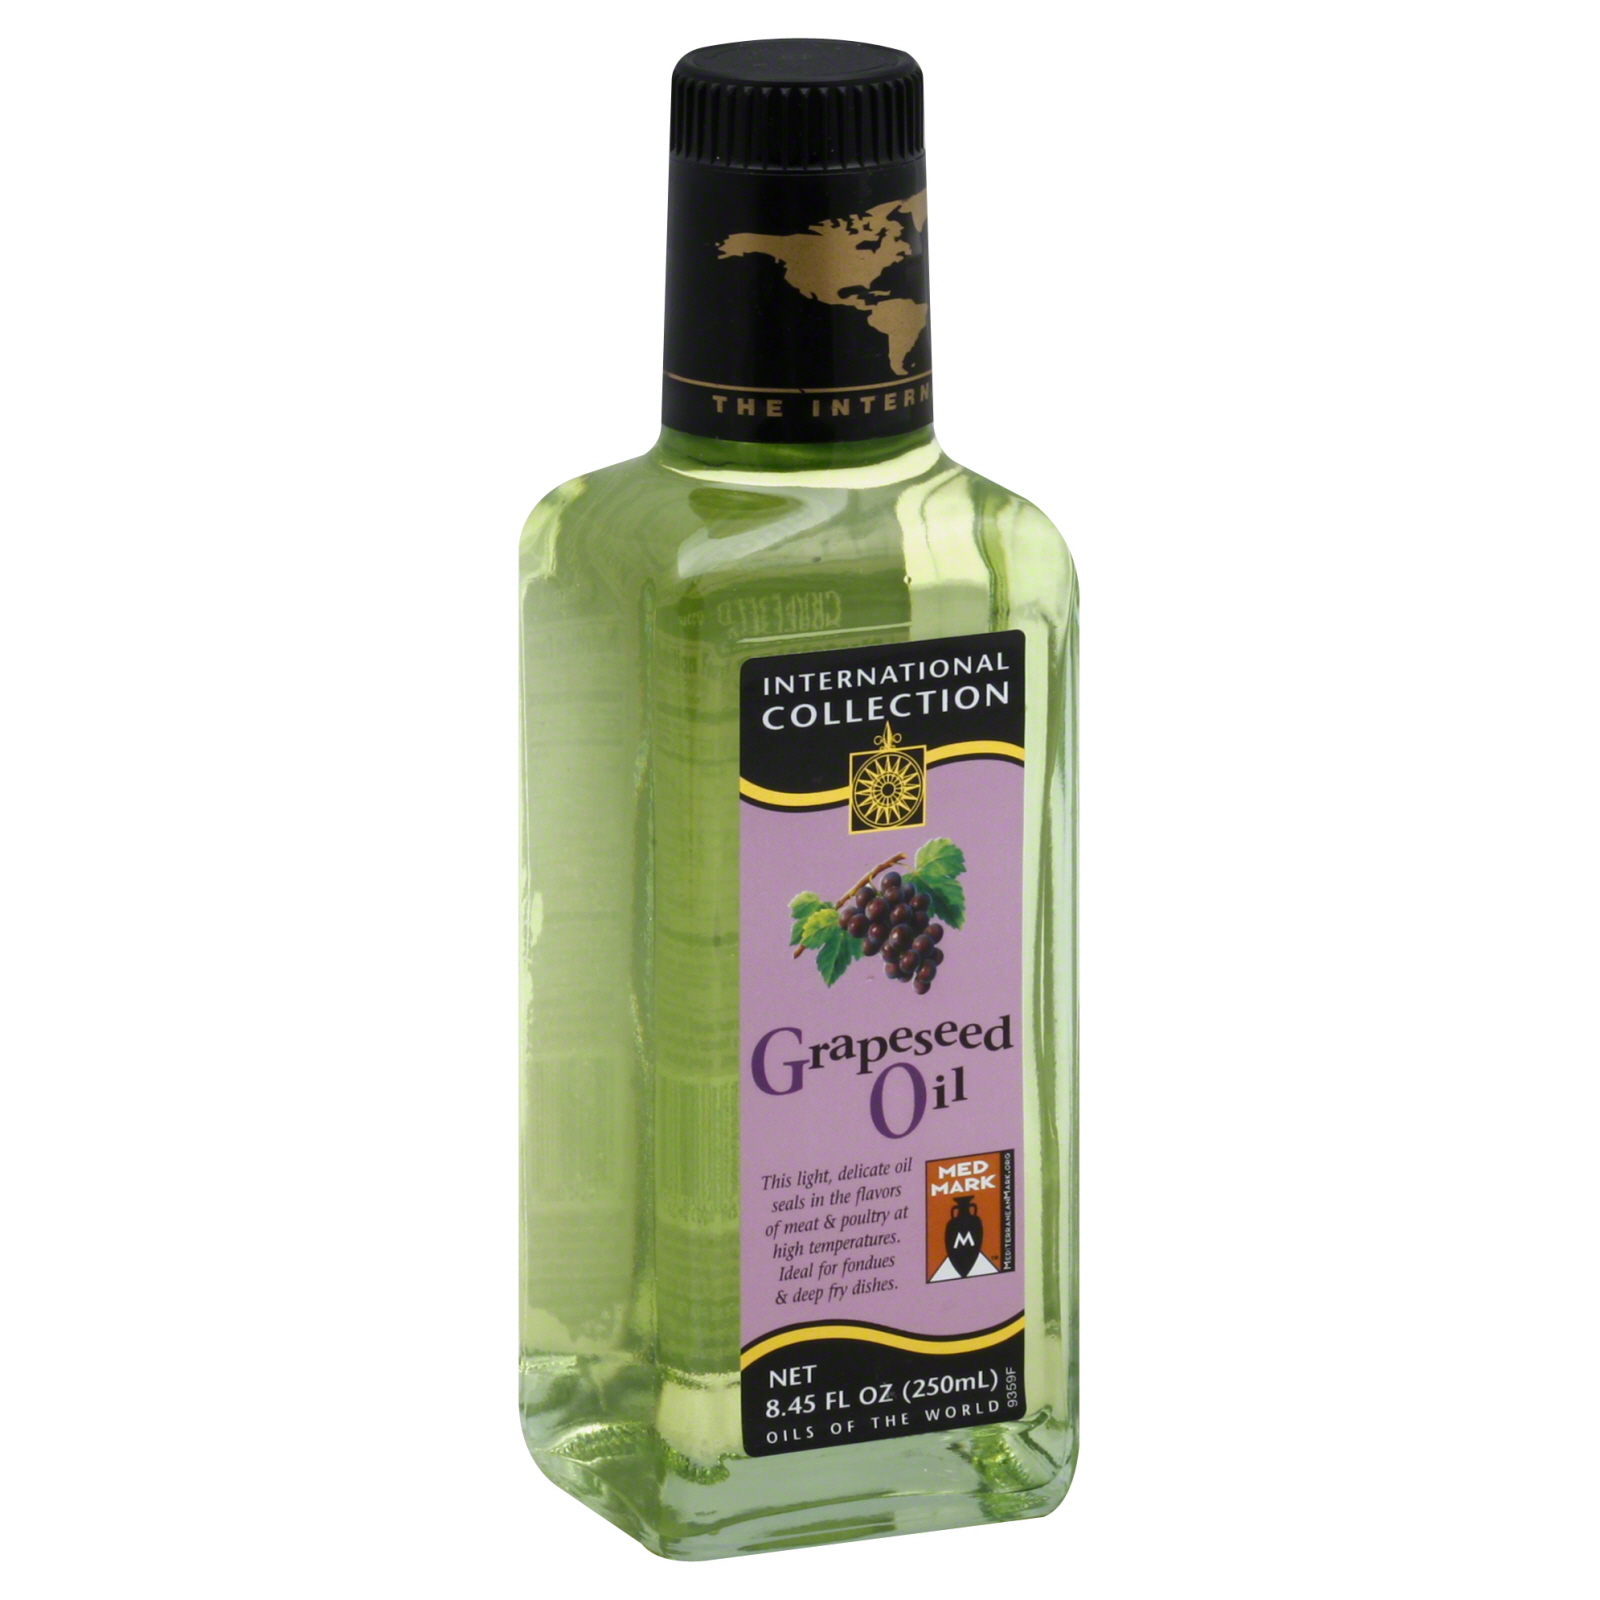 International Collection Grapeseed Oil, 8.45 fl oz (250 ml)